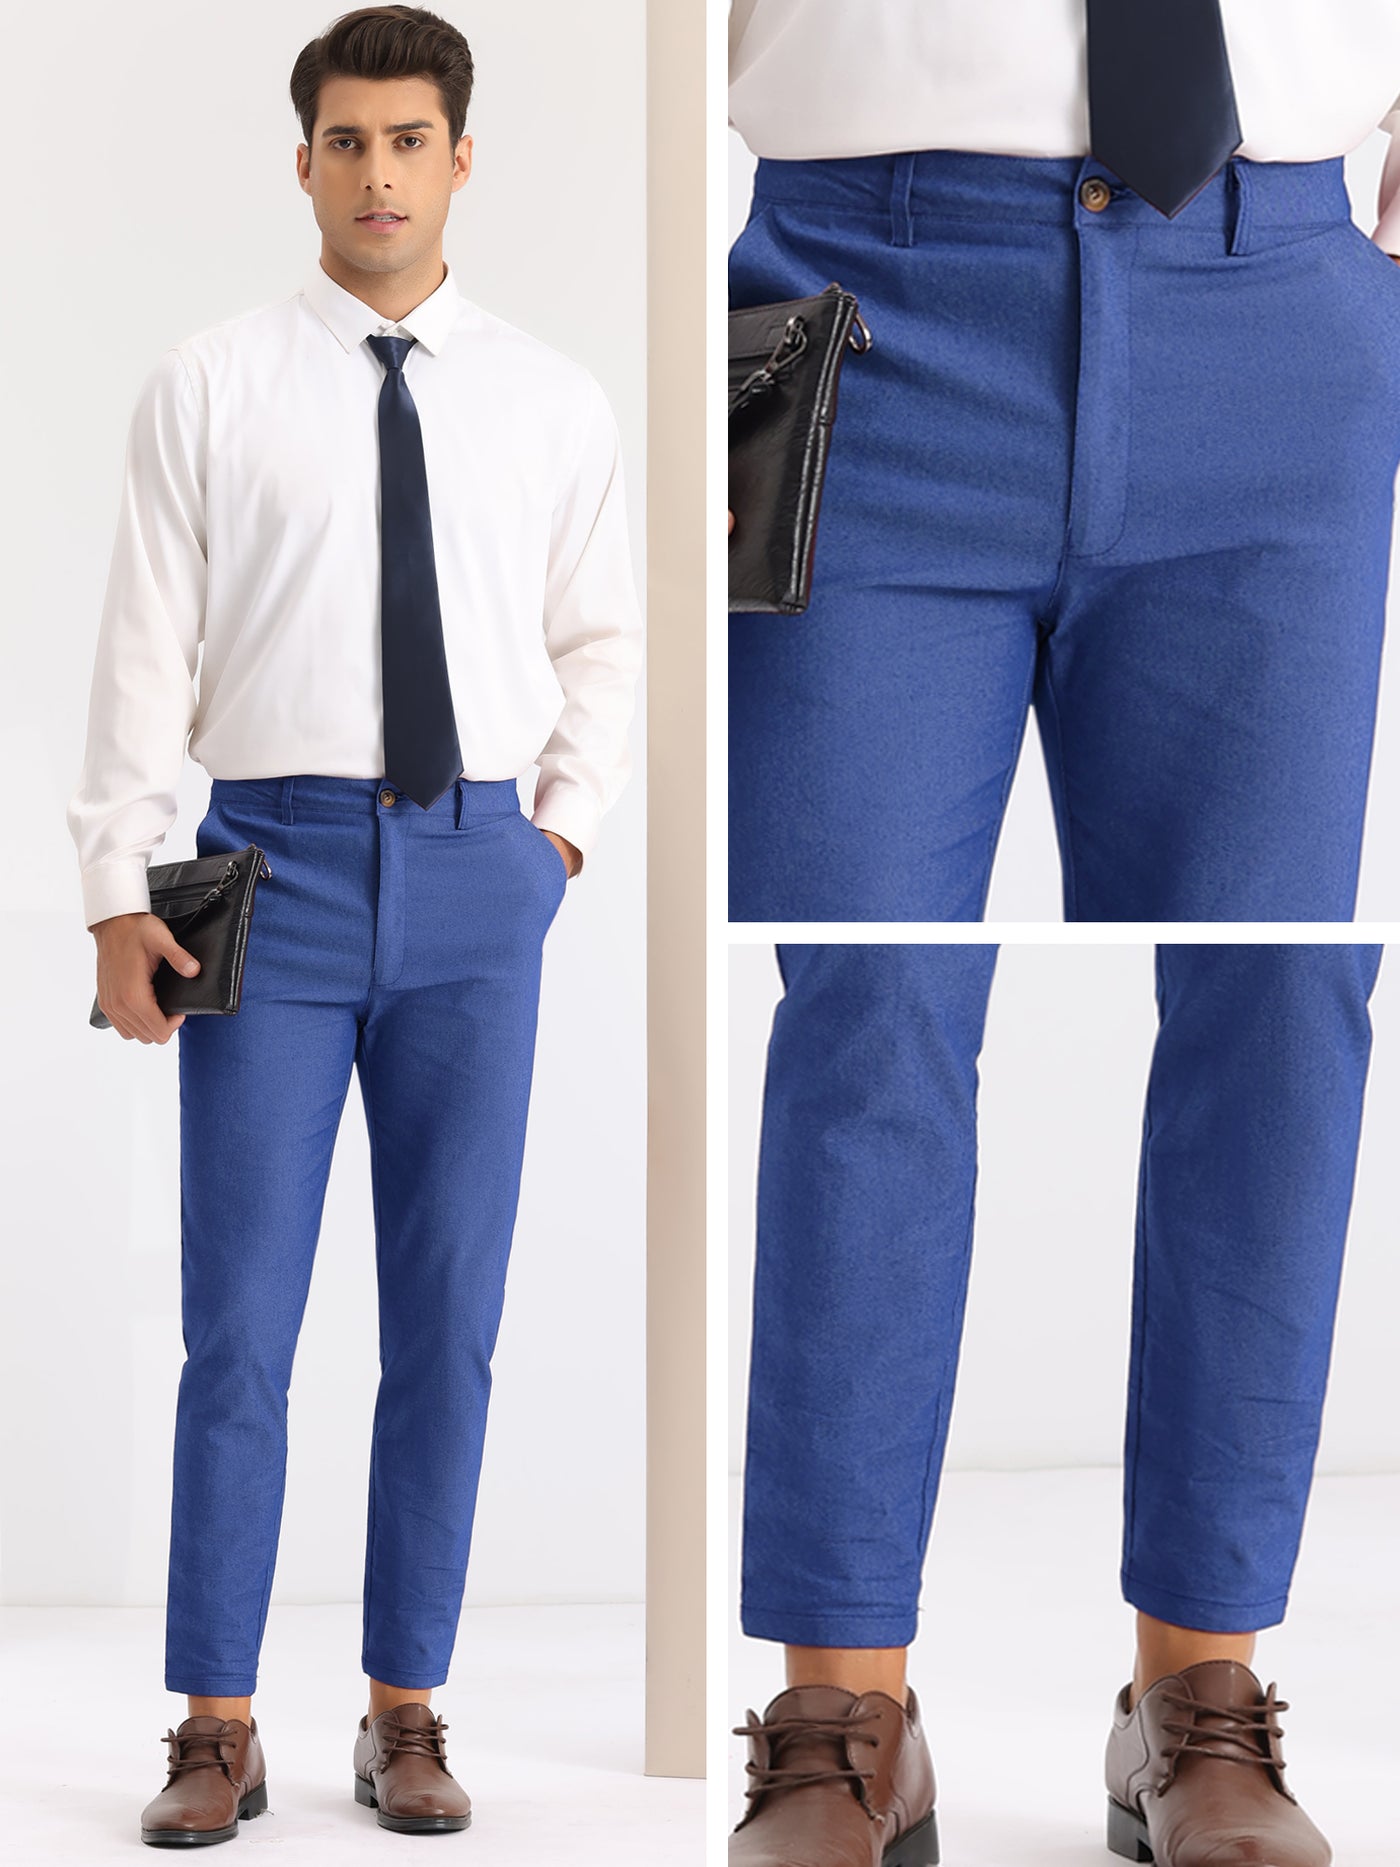 Bublédon Dress Pants for Men's Slim Fit Flat Front Business Prom Skinny Tapered Chino Trousers